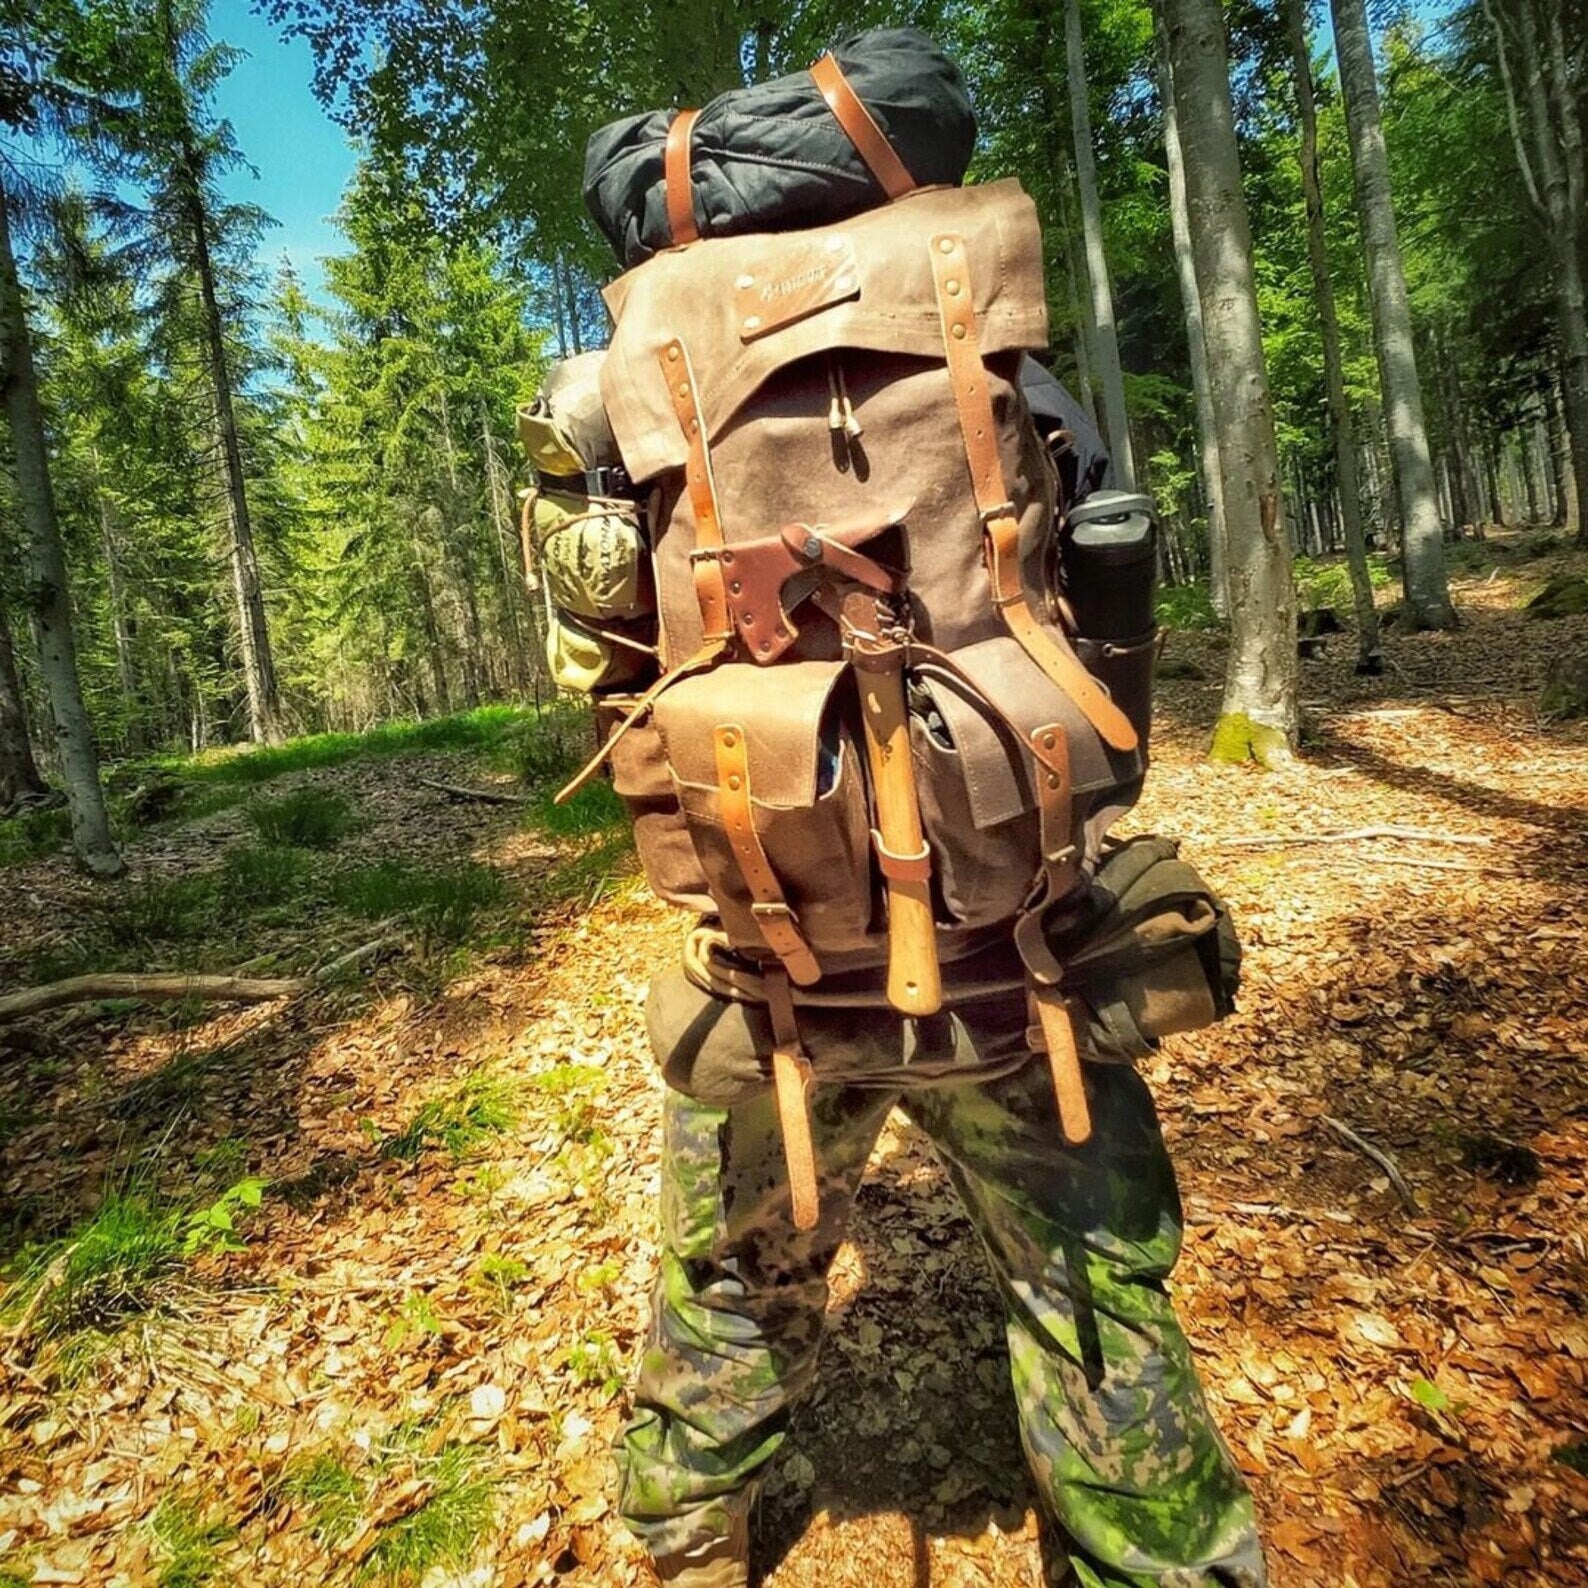 30 to 80 Liter Camping Backpack Handmade Leather and Waxed Canvas, Colors: Brown, Green, Black unlimited personalization  99percenthandmade   